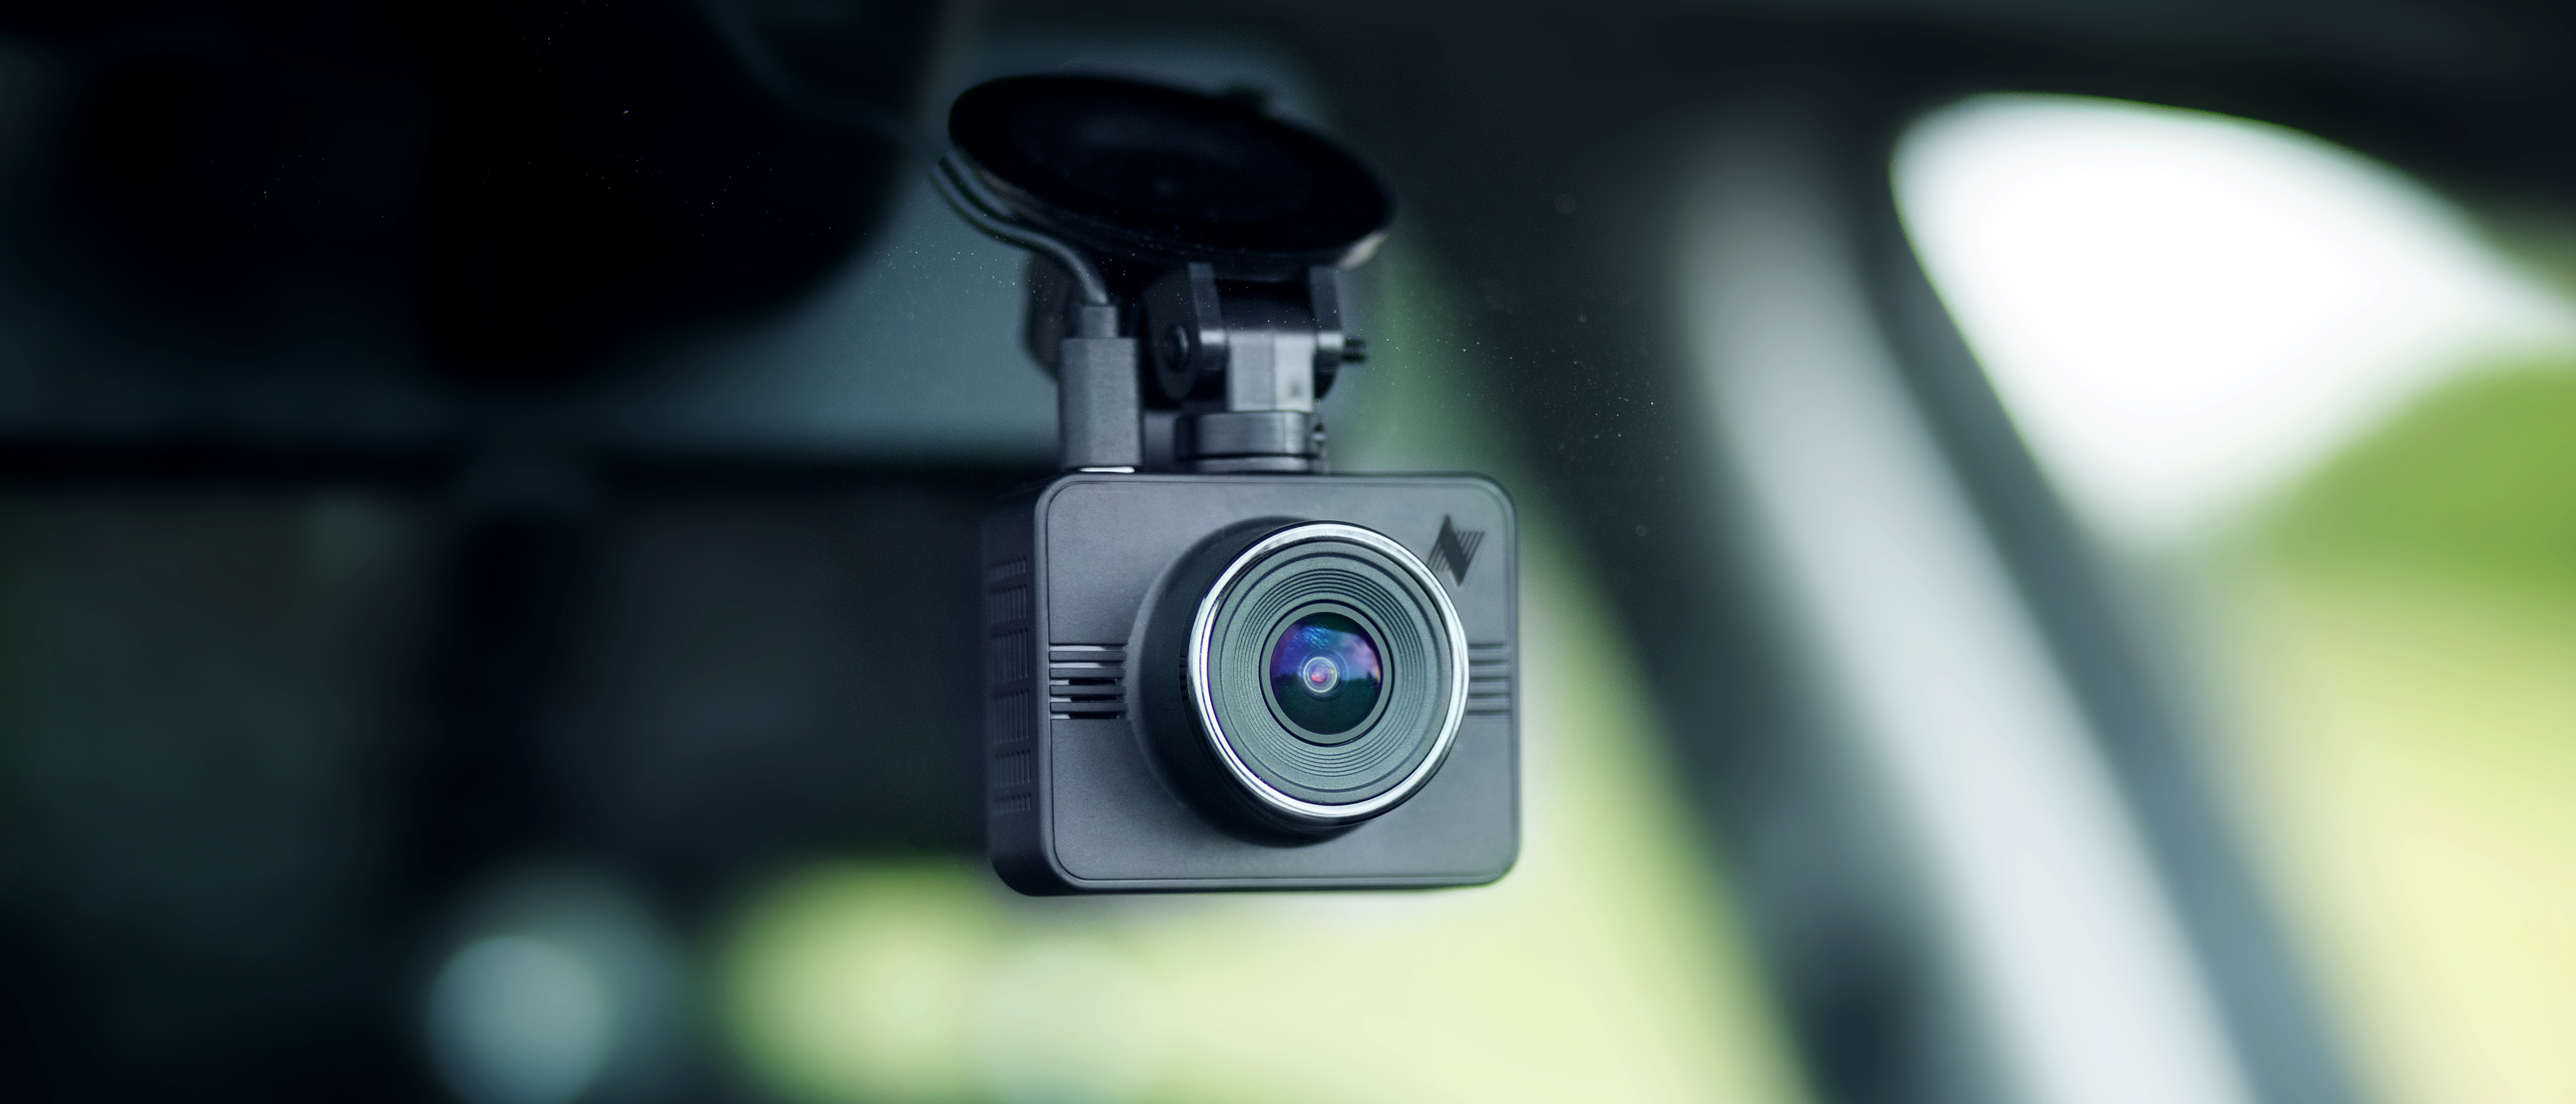 Review: Nexar Pro Dual Dashcam System's Instant Streaming